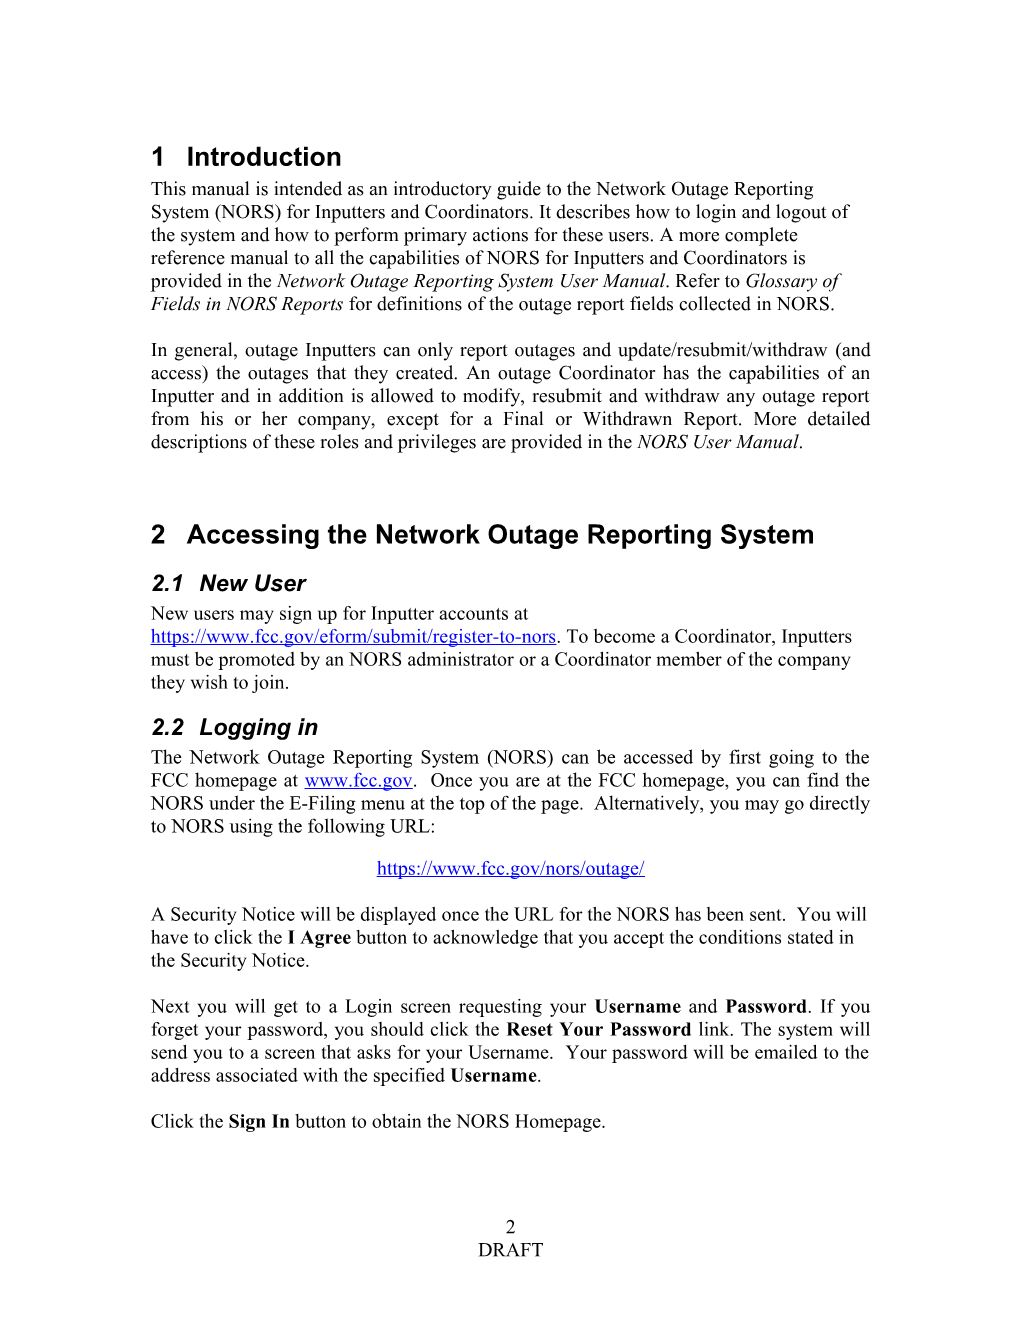 Instructions for Completing Wire Line Outage Reporting Template